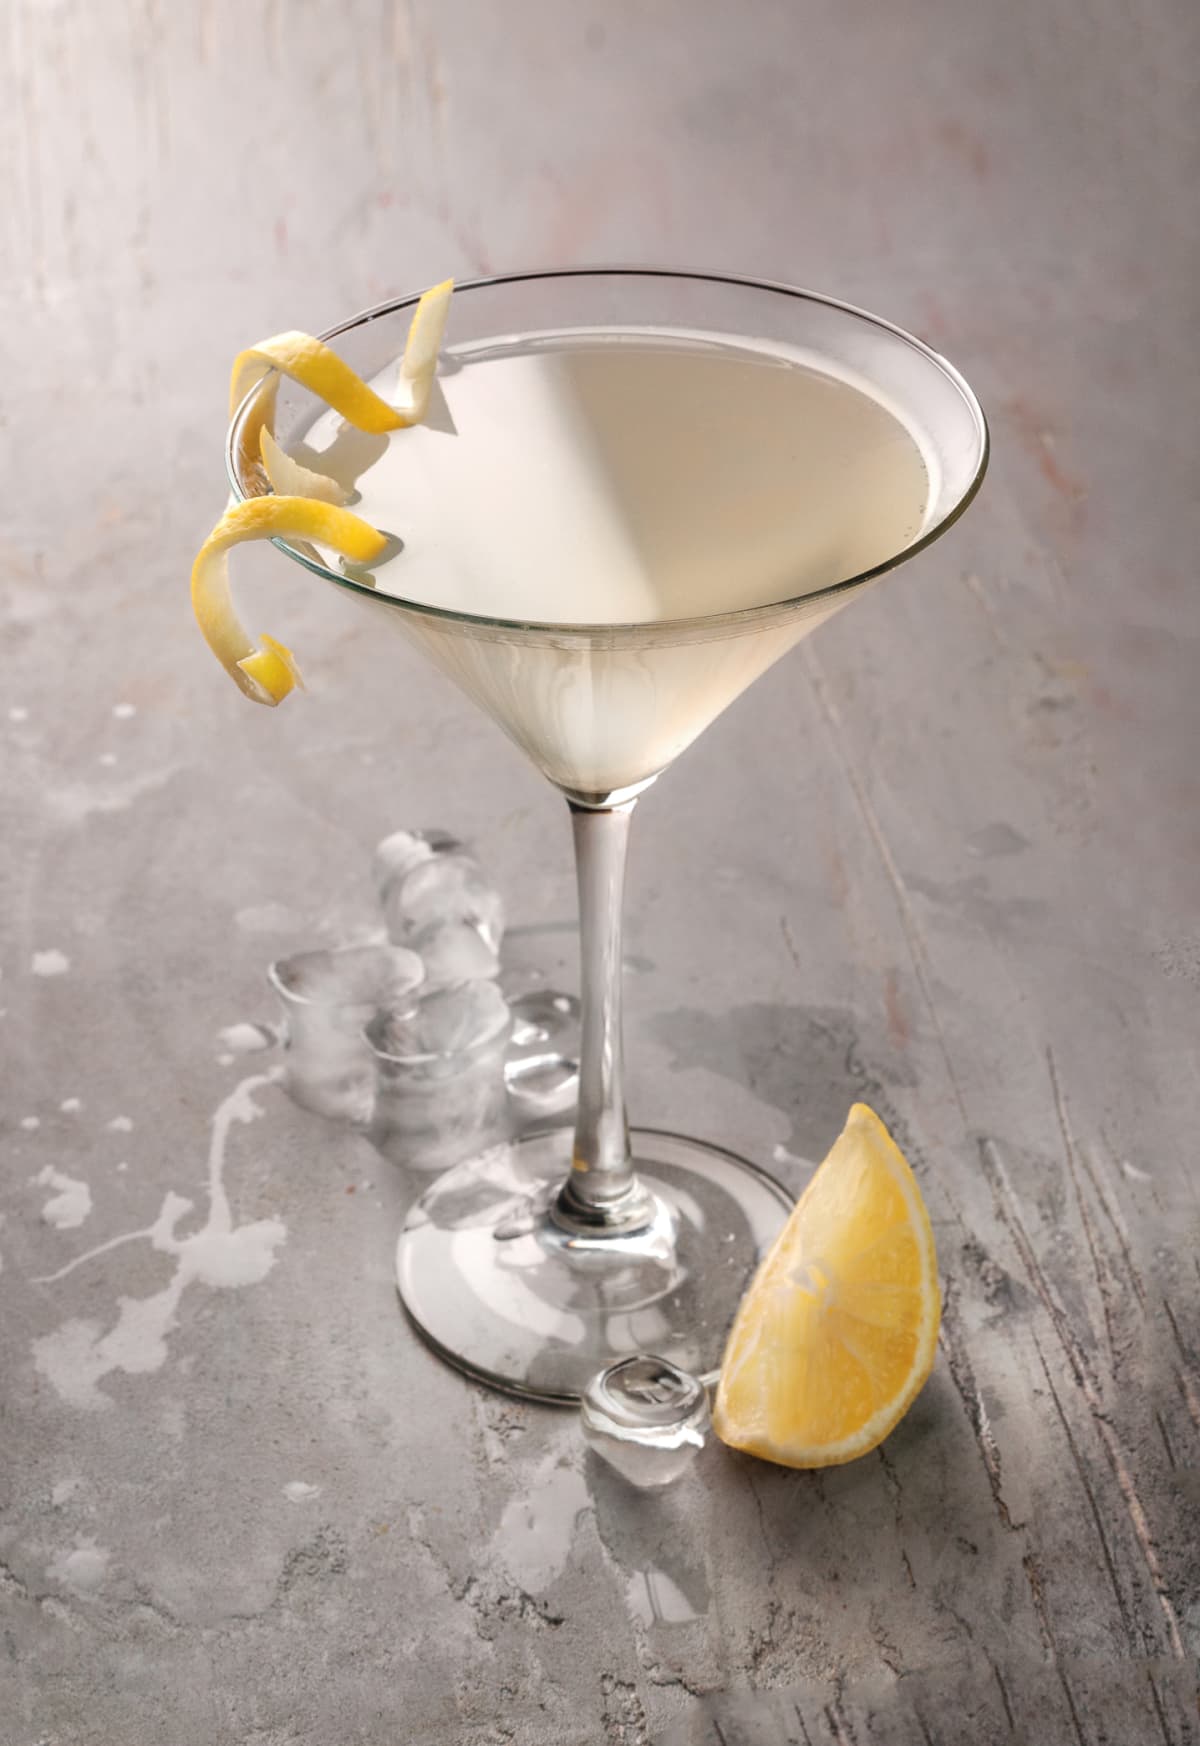 Martini glass of French 75 cocktail with lemon twist